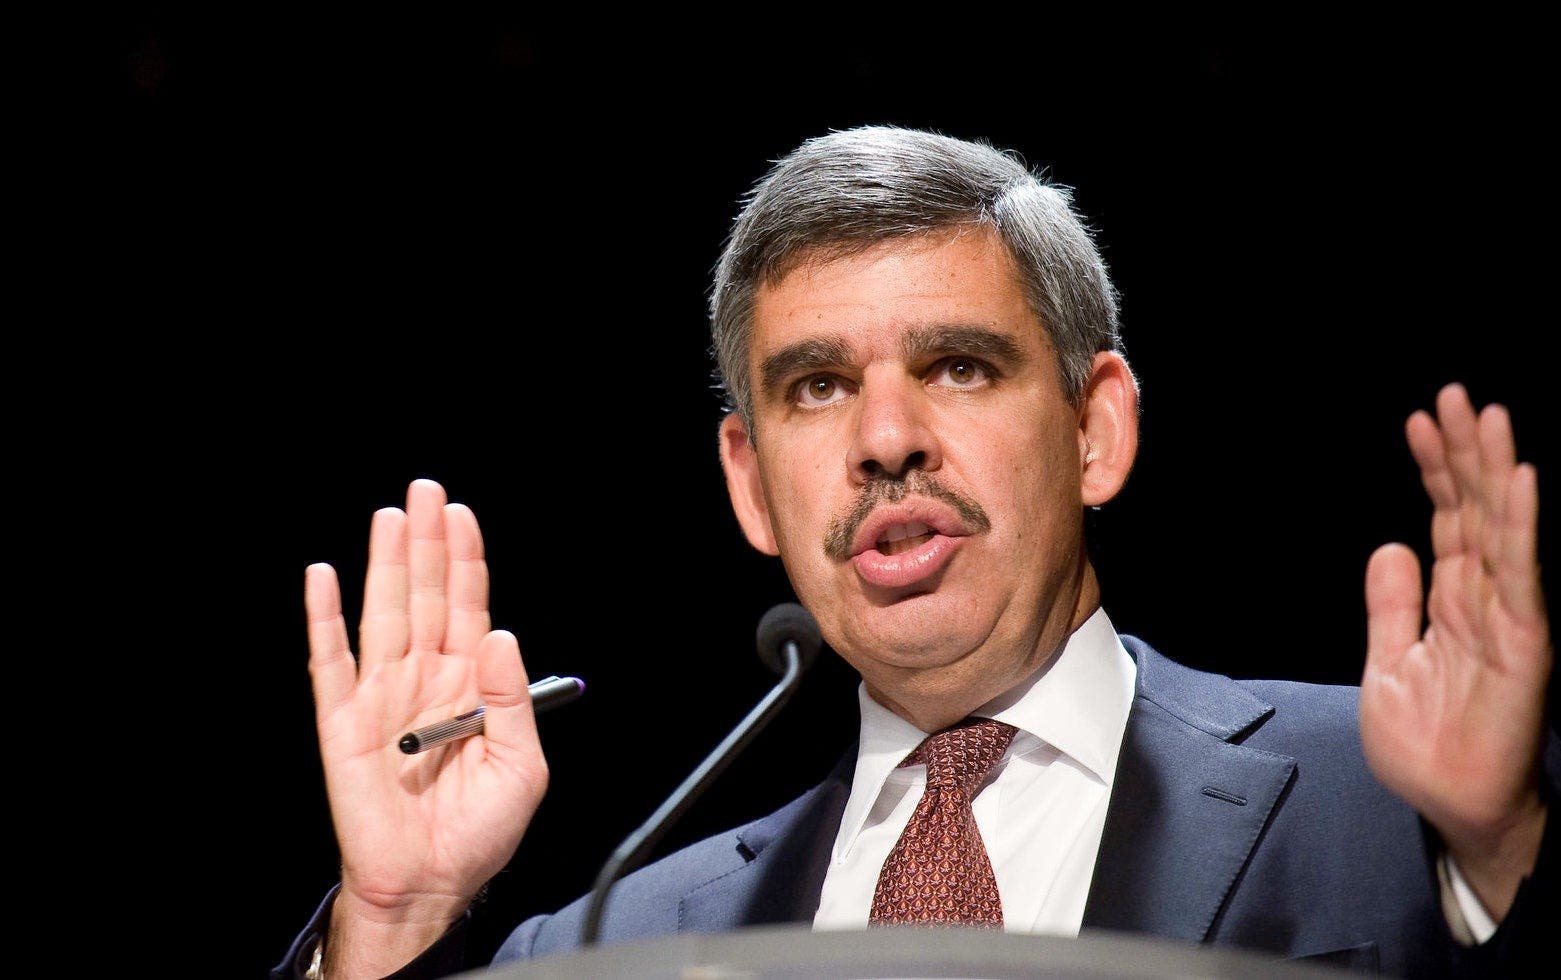 El-Erian Says Markets Not Buying Fed's Peak Rate Projection Of 5.1% By 2023 End: 'So Much For Credible Forward Policy Guidance'